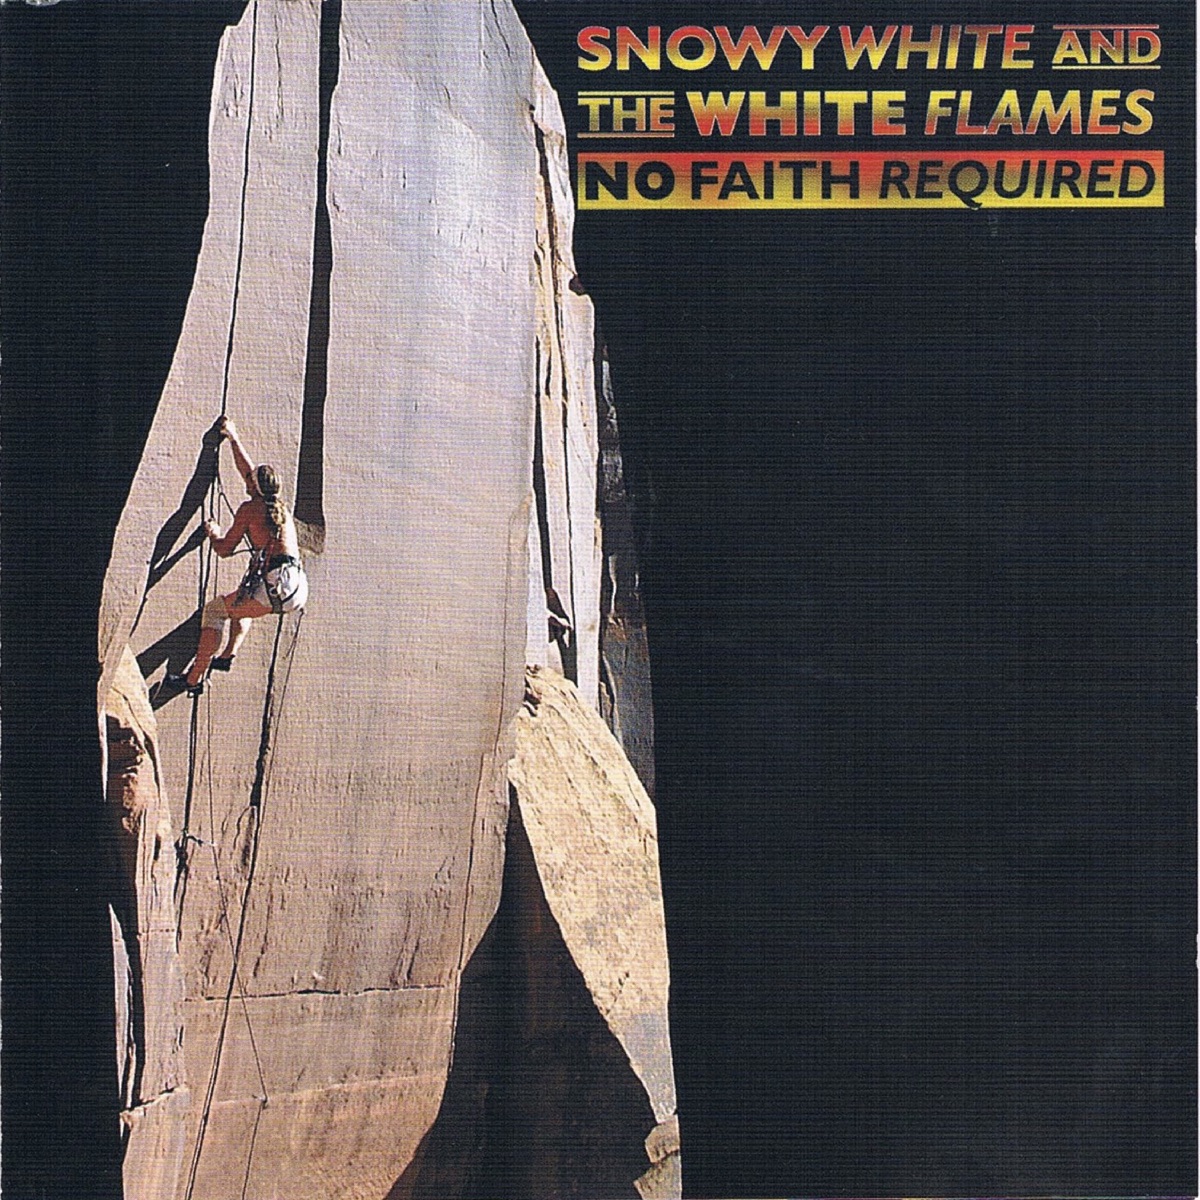 After Paradise - Album by Snowy White